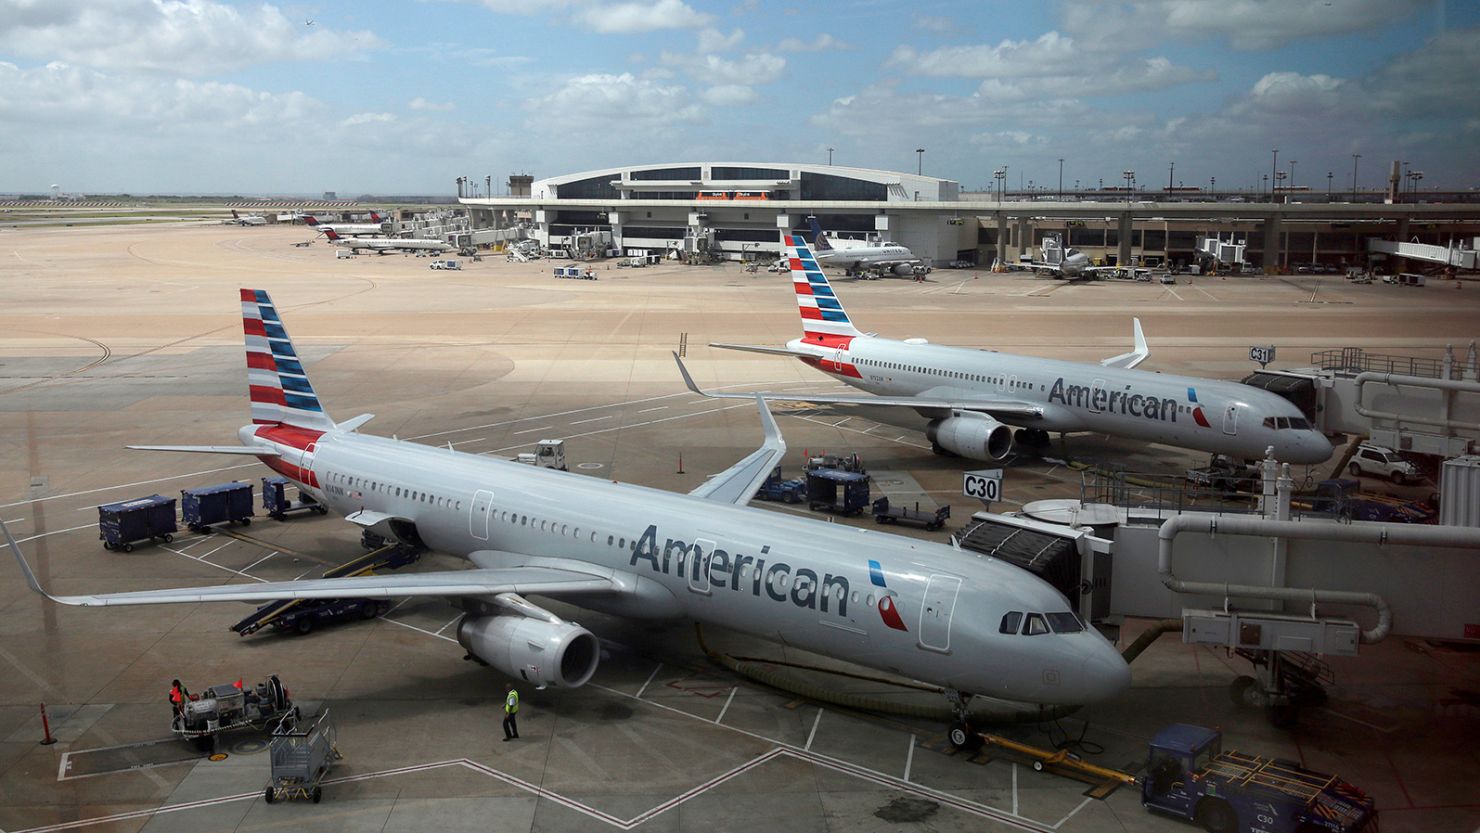 FILE - In this June 16, 2018, file photo, American Airlines aircrafts are seen at Dallas-Fort Worth International Airport in Grapevine, Texas. American Airlines is expanding at its most profitable airport, opening 15 new gates at Dallas-Fort Worth International. American said the gates that opened Friday, May 2, 2019, in Terminal E will let it add more than 100 daily flights on its American Eagle affiliate. (AP Photo/Kiichiro Sato, File)